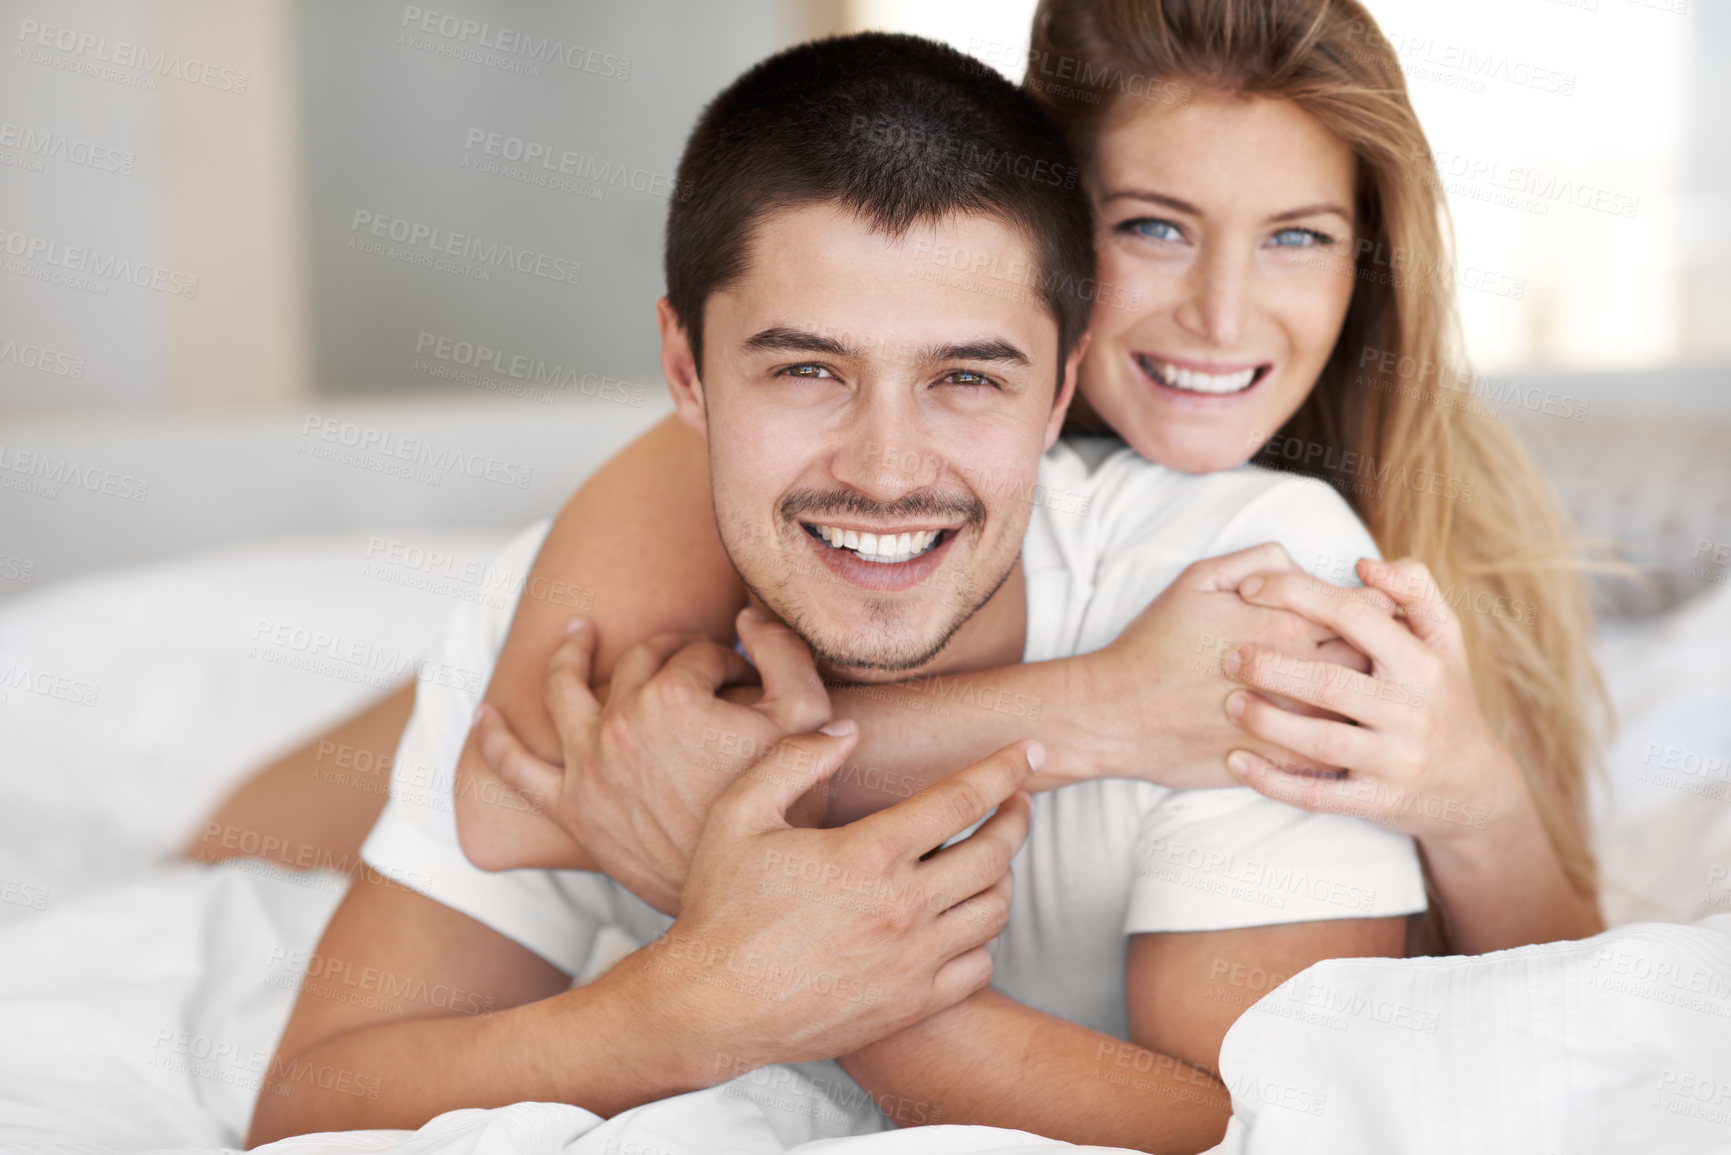 Buy stock photo Attractive young woman embracing her partner while they lie in bed together